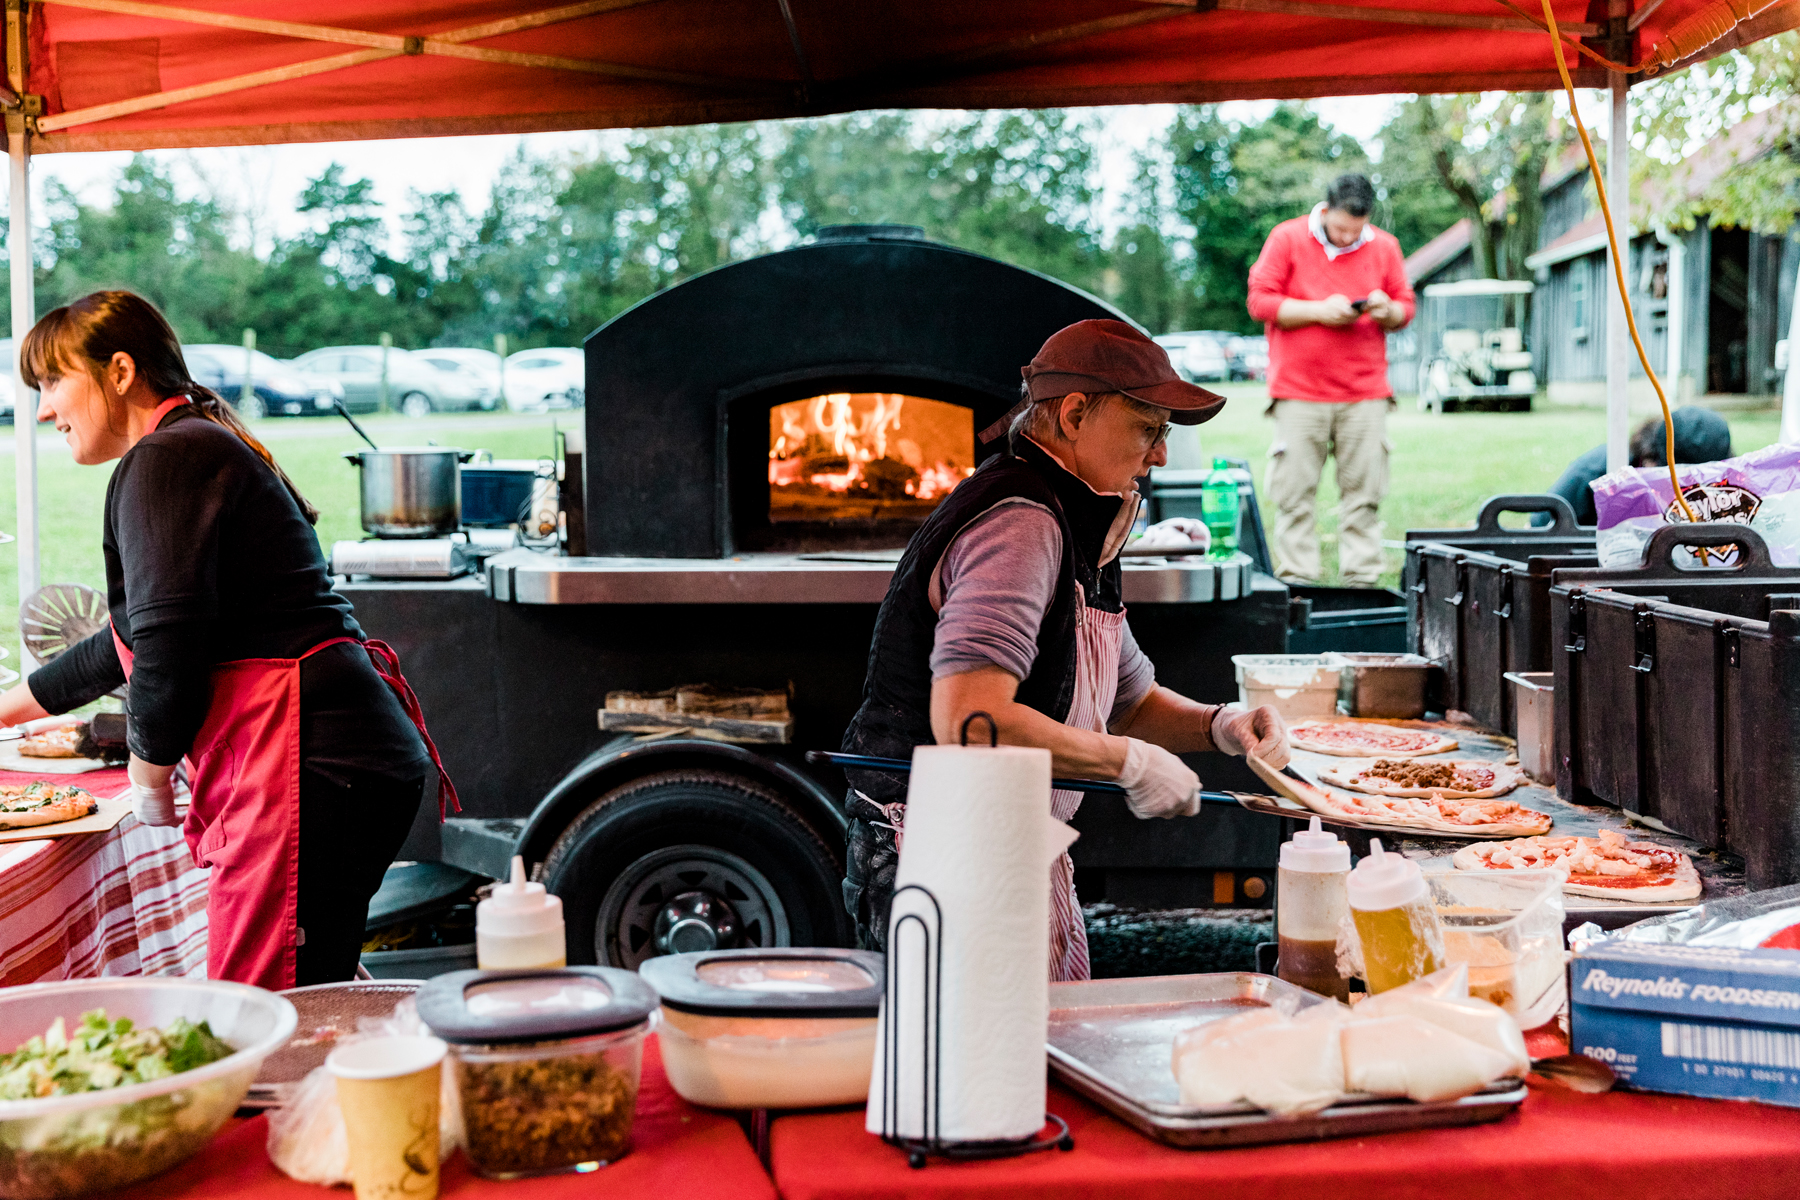   DO: Consider a mobile caterer, such as brick oven pizza! Everyone loves pizza. However, with a mobile company you will likely need to add a supplemental catering company to take care of trash removal, moving tables, and more. So think carefully.   